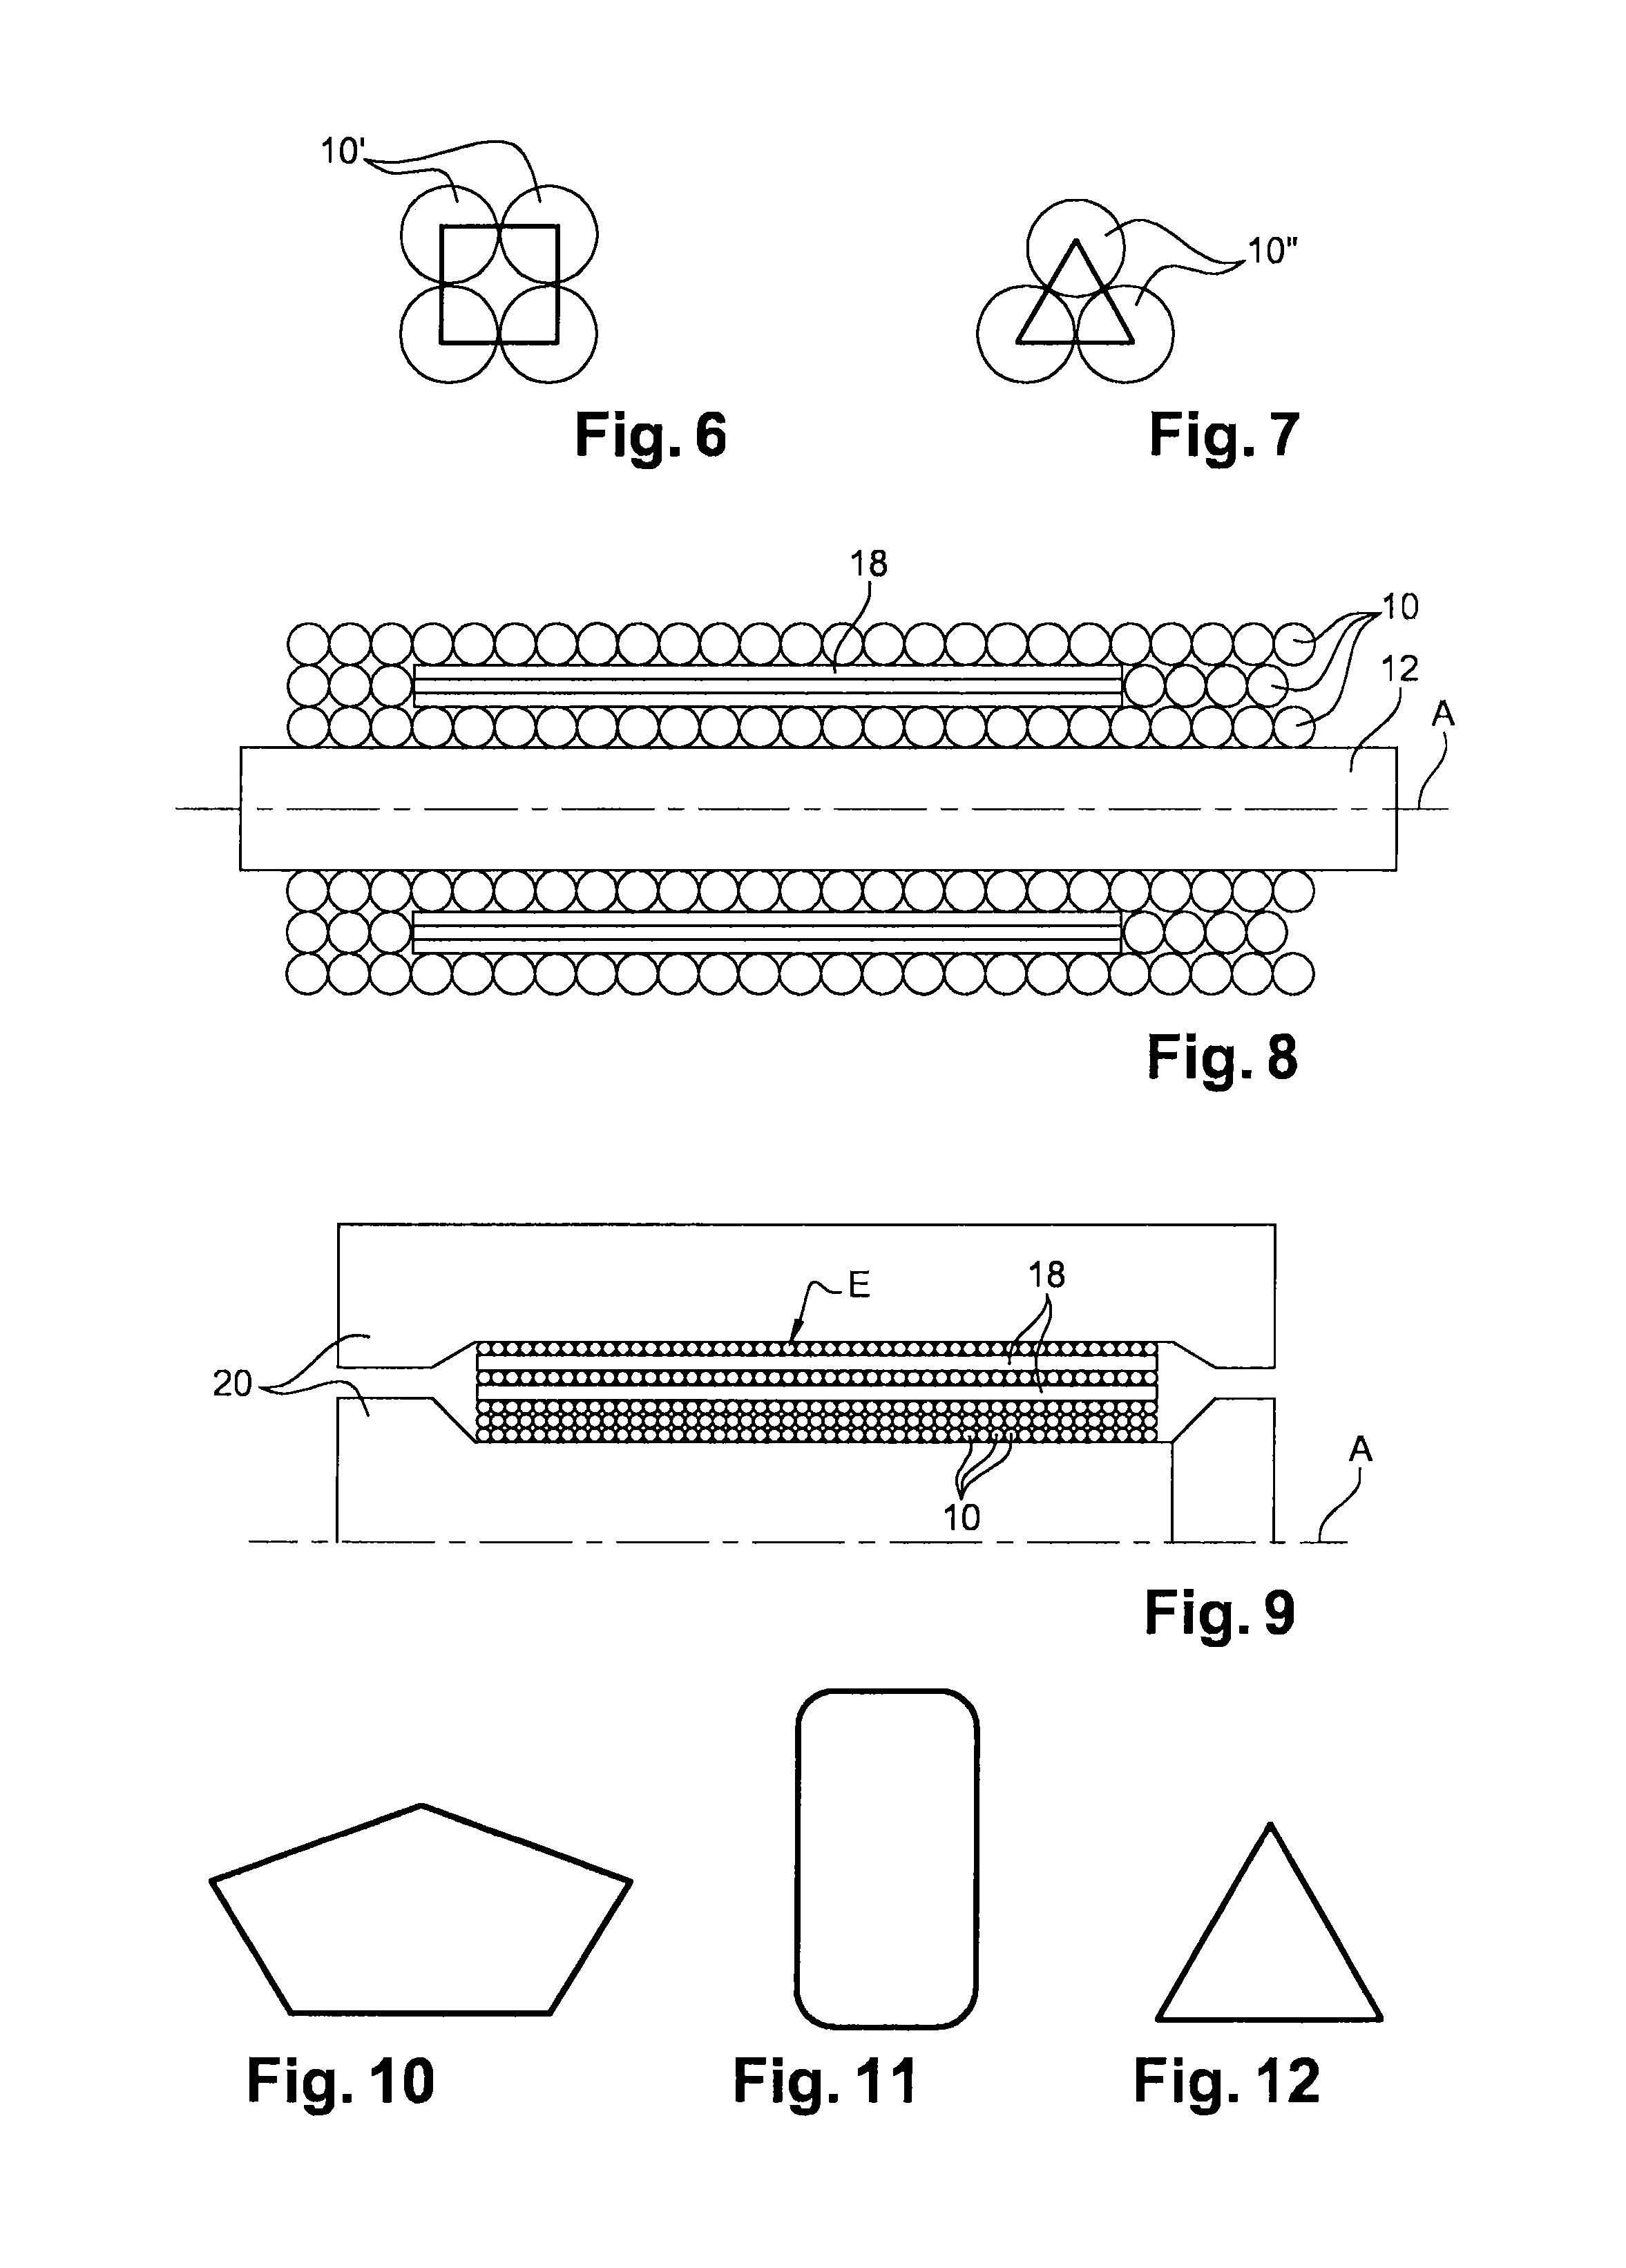 Method for fabricating a single-piece part for a turbine engine by diffusion bonding